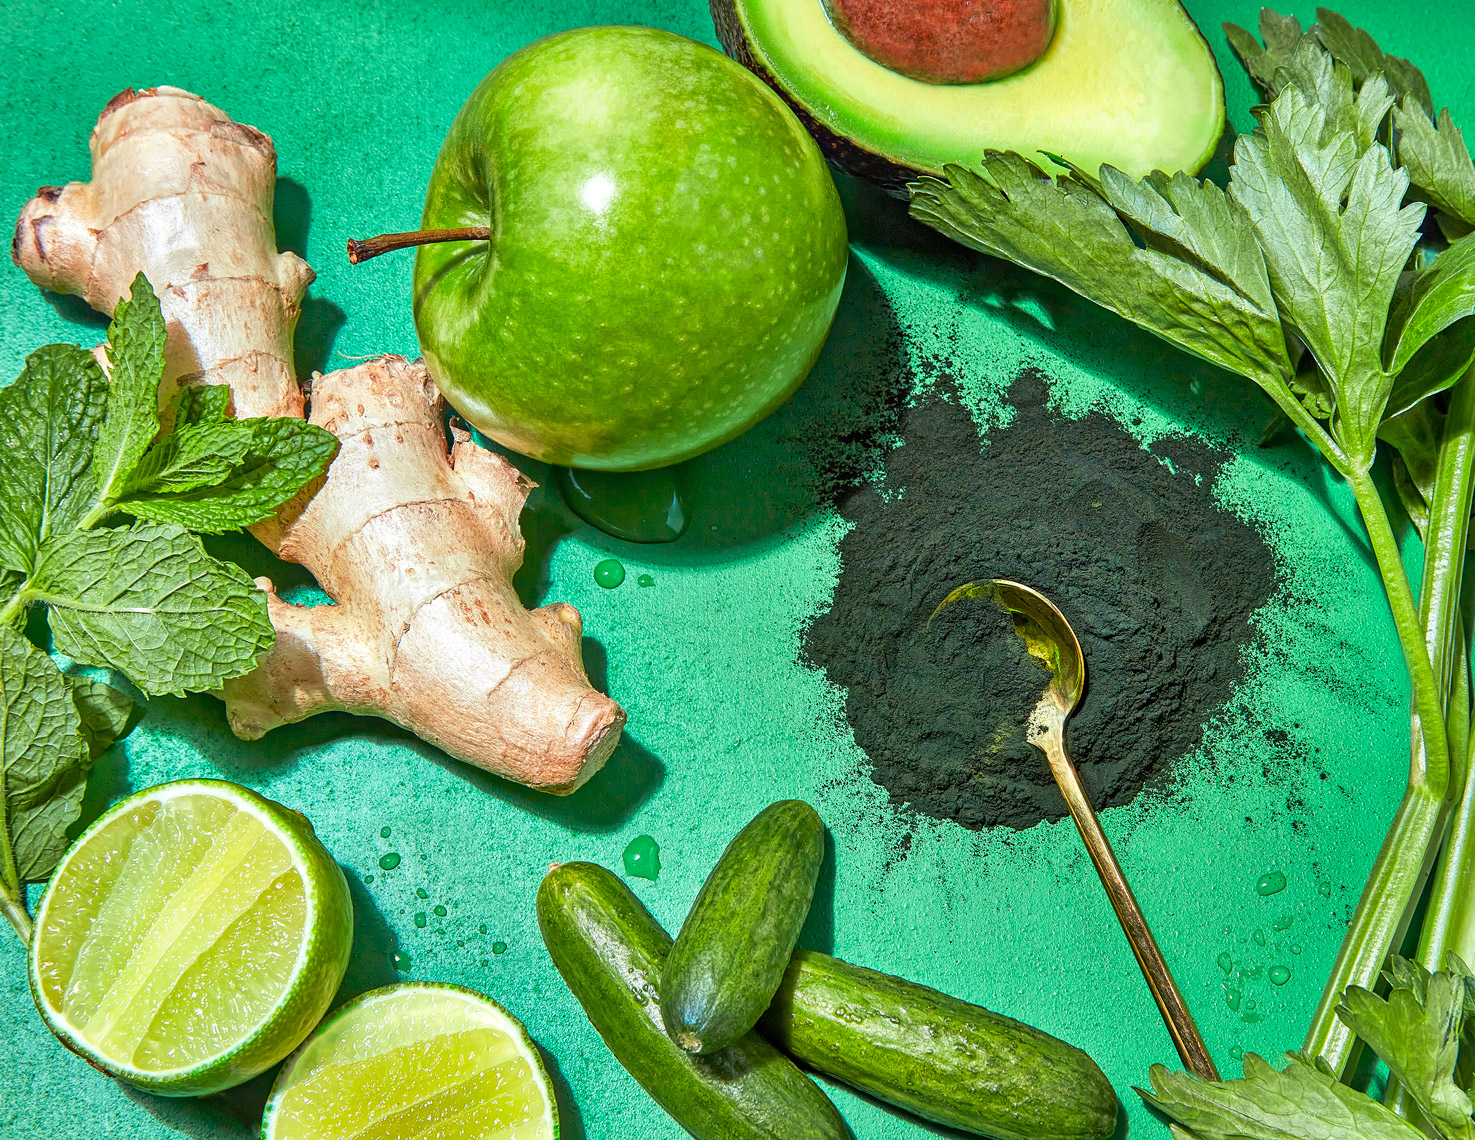 Marx_Photography_Food_Green_Smoothie Ingredients